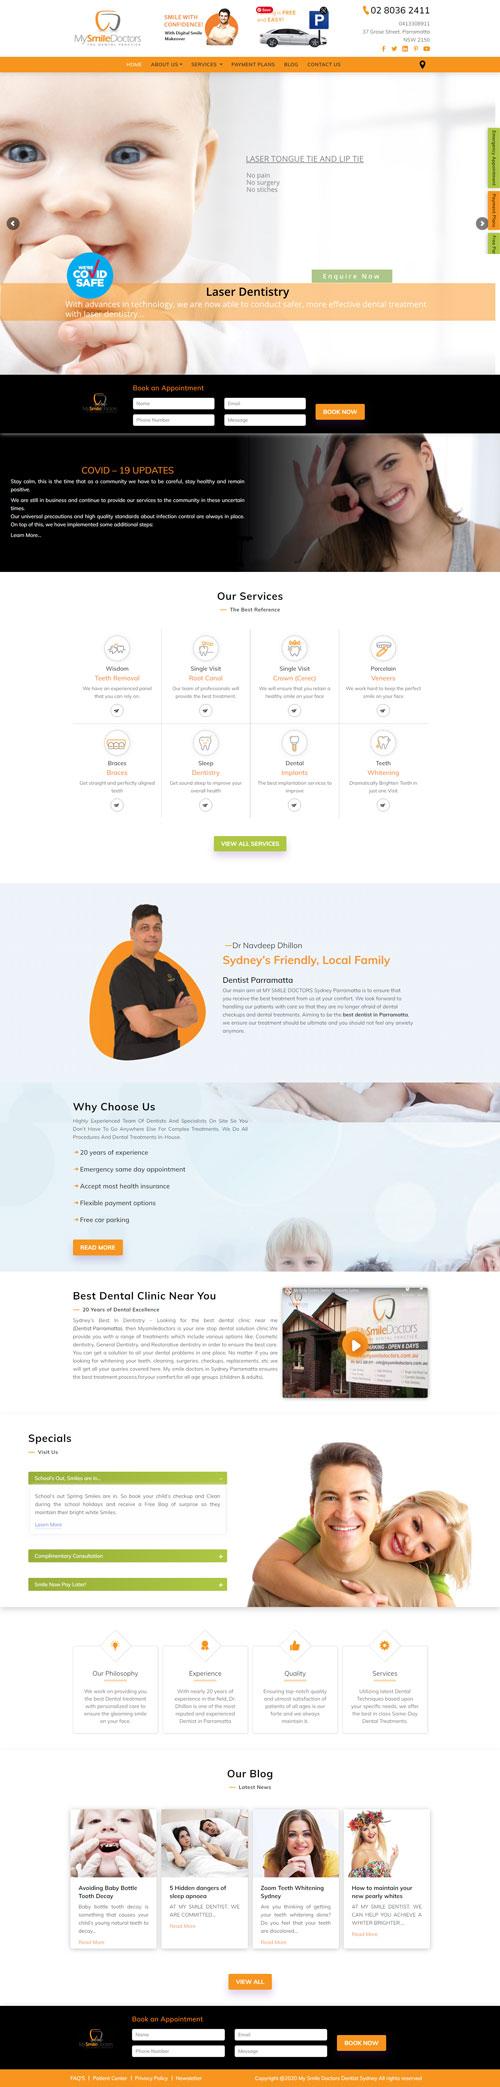 give life charity donation website design